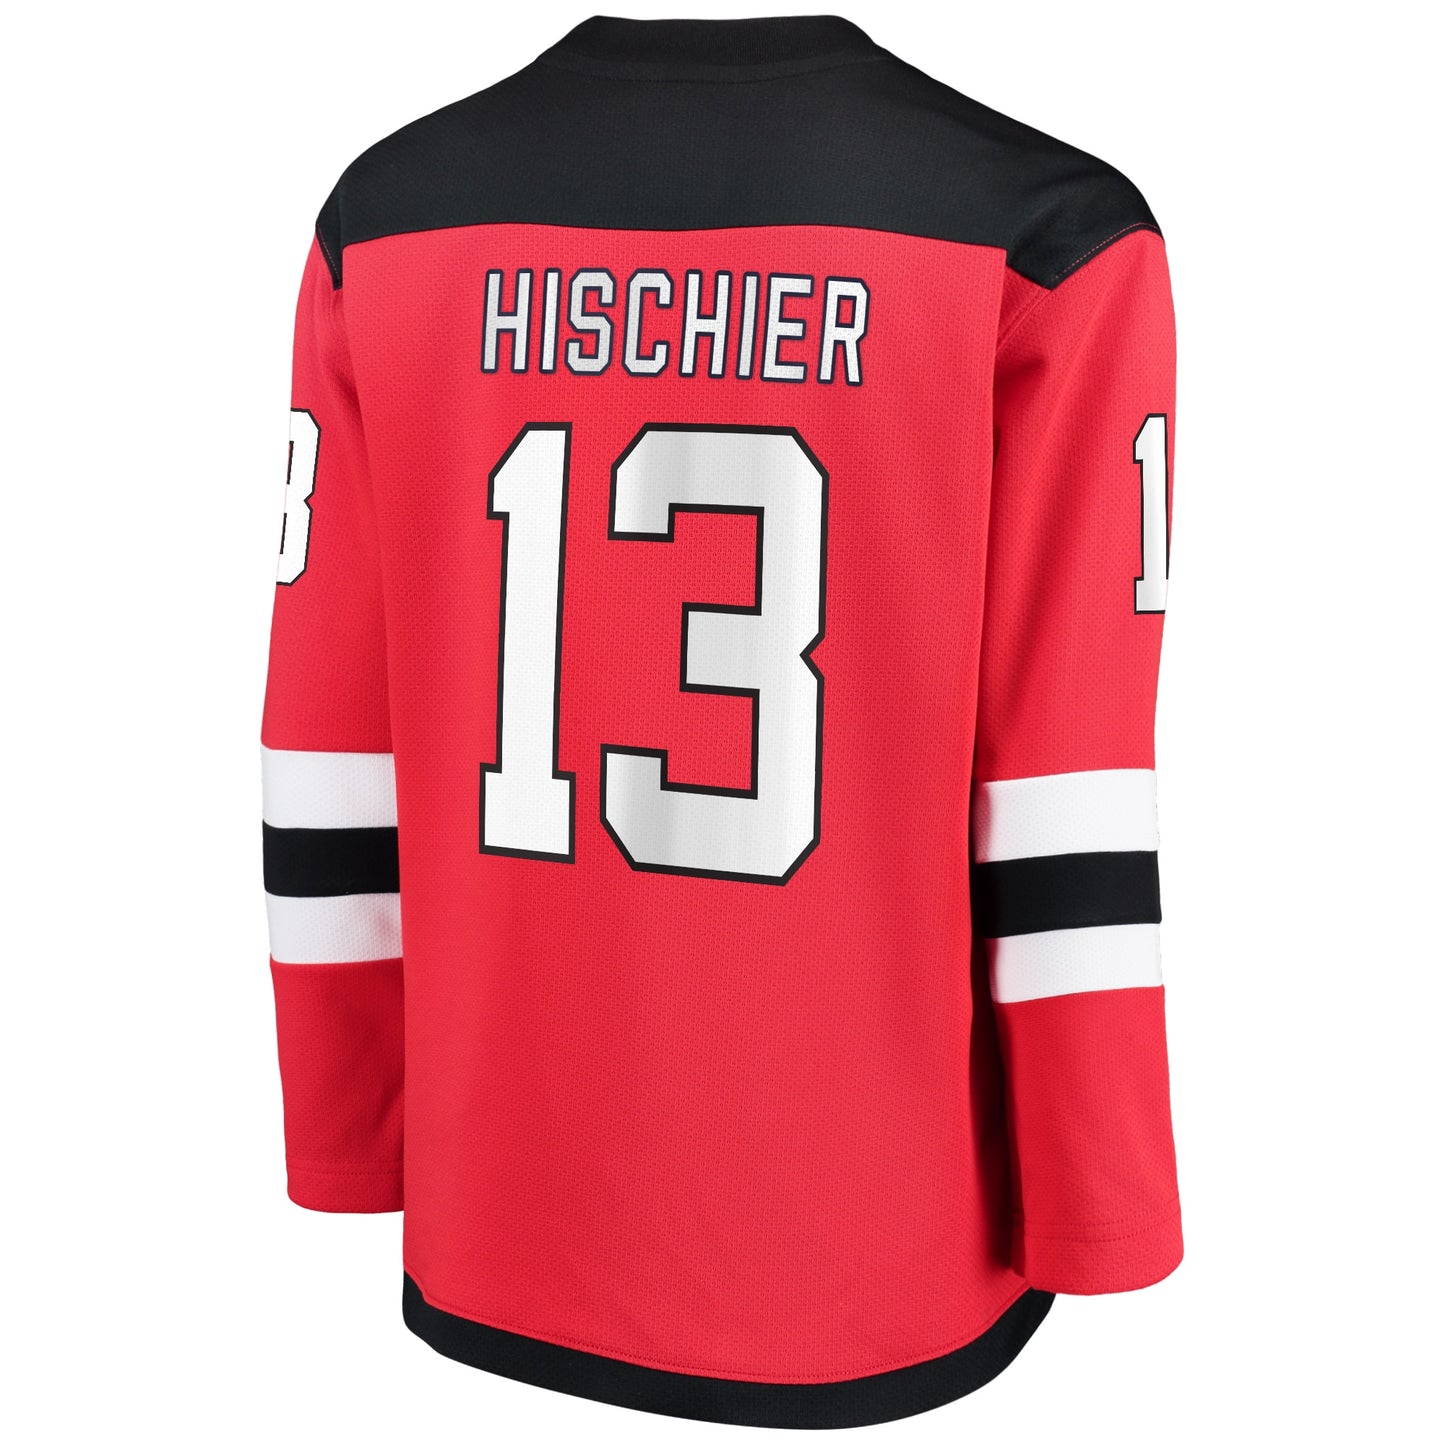 Nico Hischier New Jersey Devils Fanatics Branded Youth Replica Player Jersey - Red